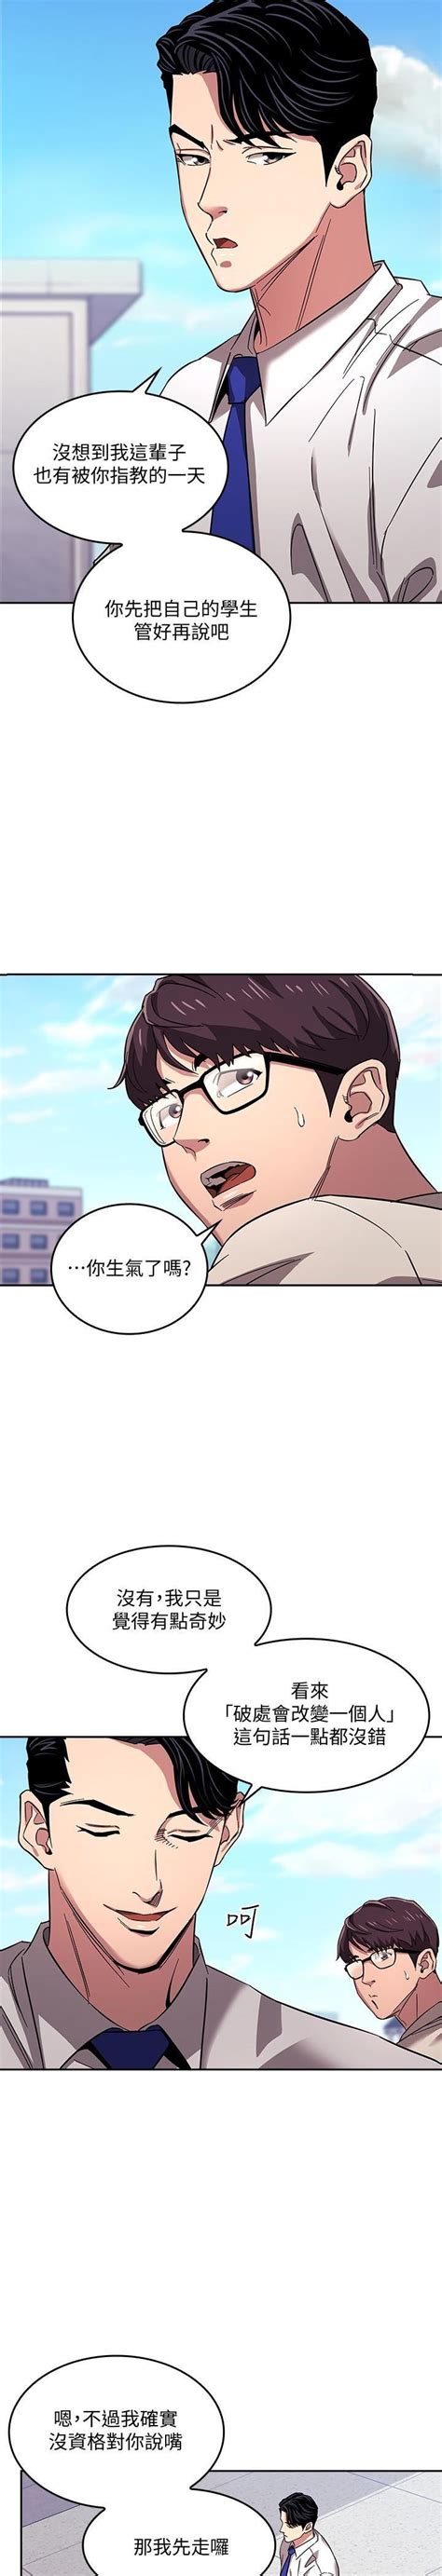 Leer hole in one capítulo 4 manhwa online. Read Manhwa, manga online, manhwa engsub, manhwa mobile